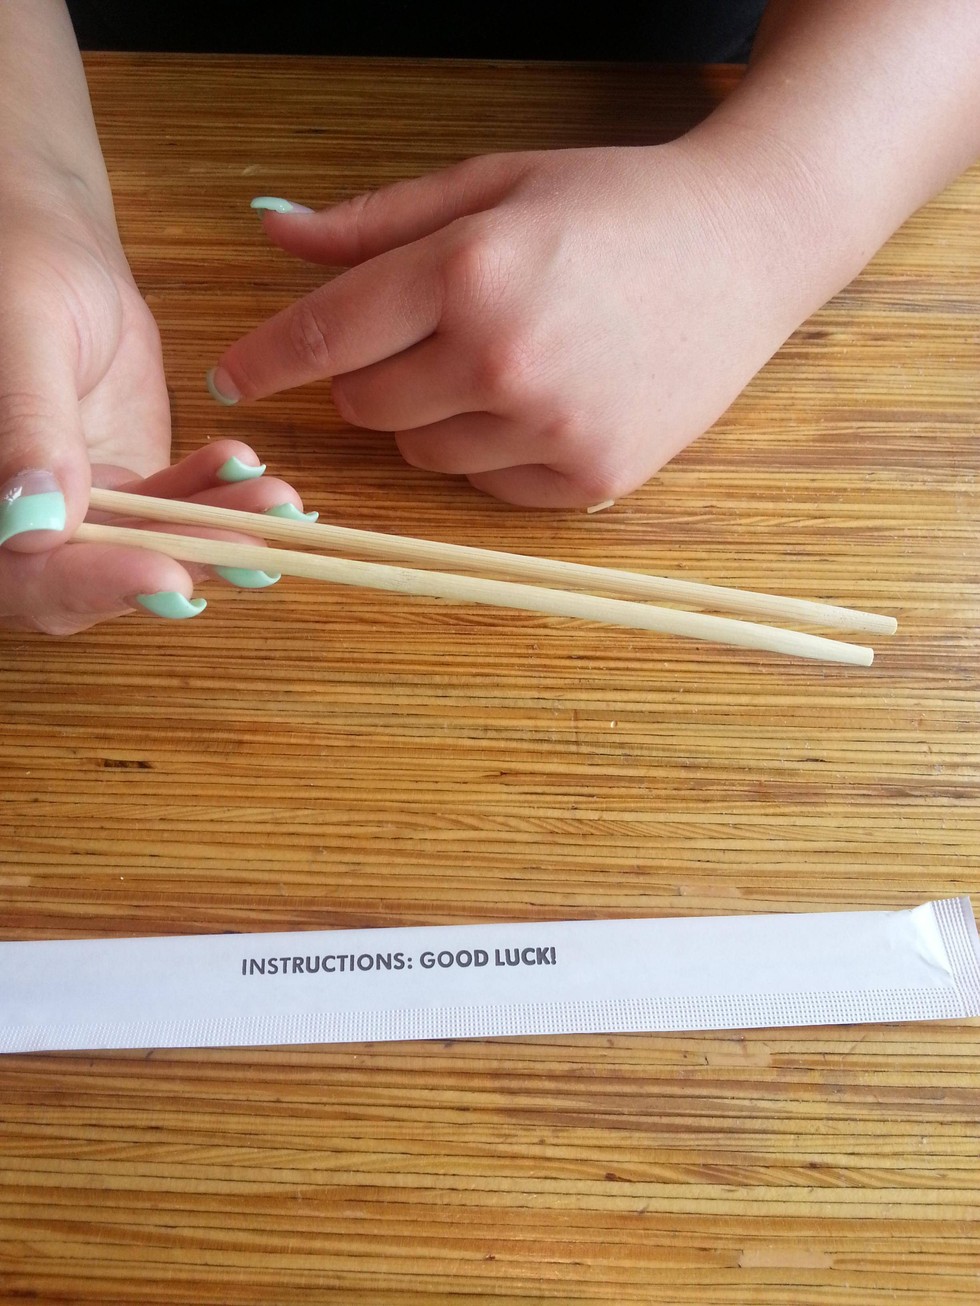 20 ridiculous instructions that actually exist